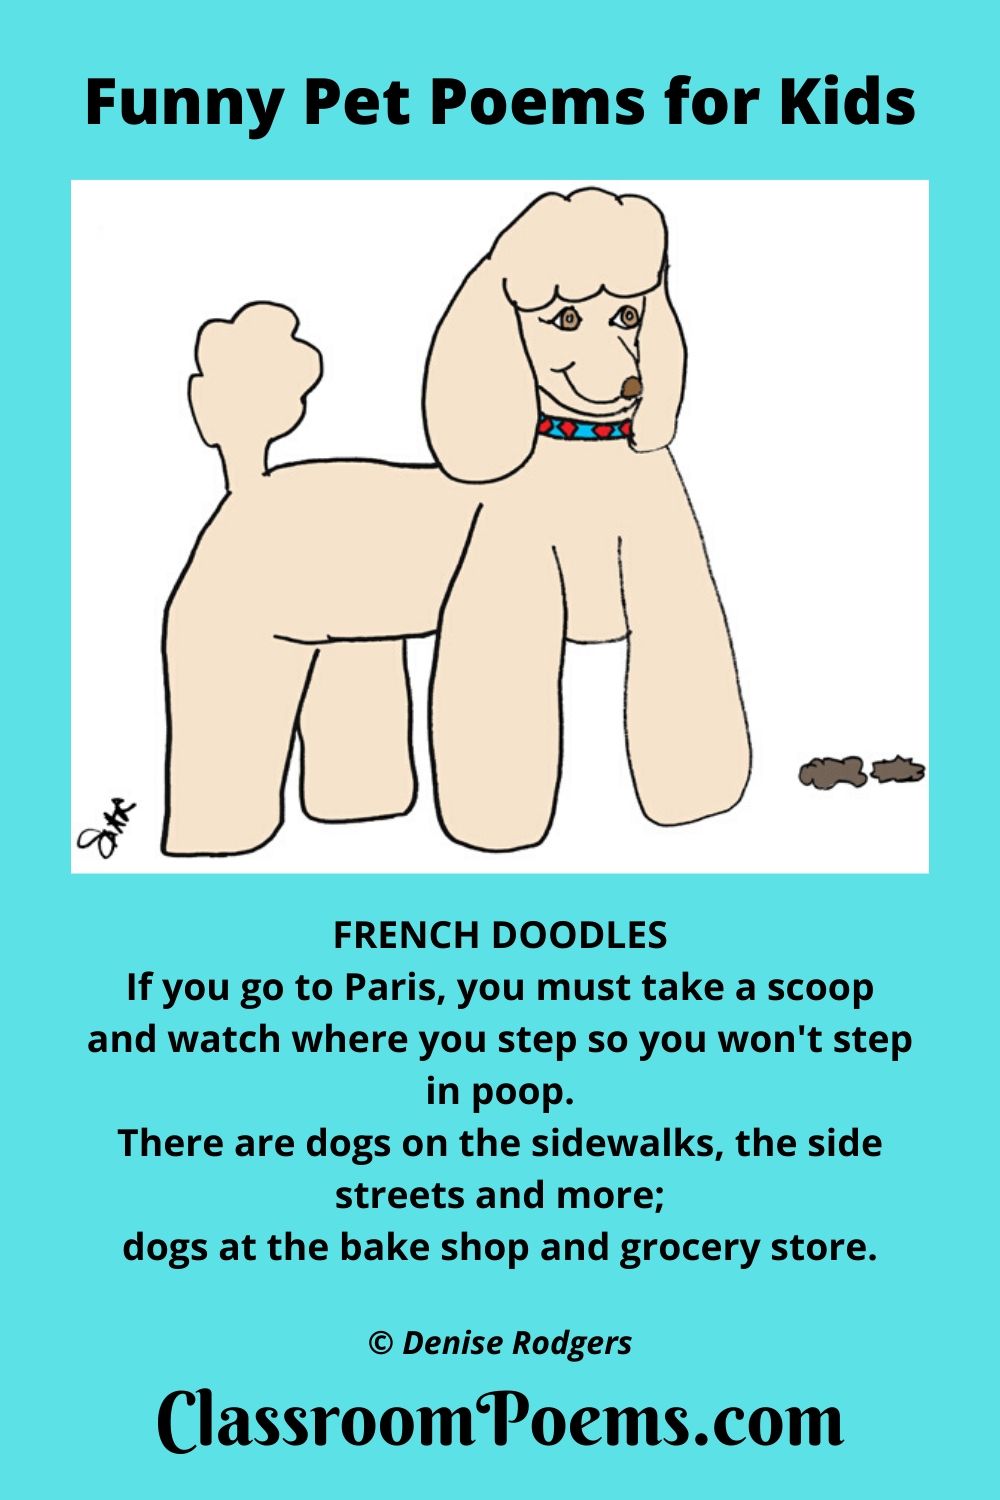 French poodle, an illustration for French Doodles, a funny dog poem by Denise Rodgers on ClassroomPoems.com.